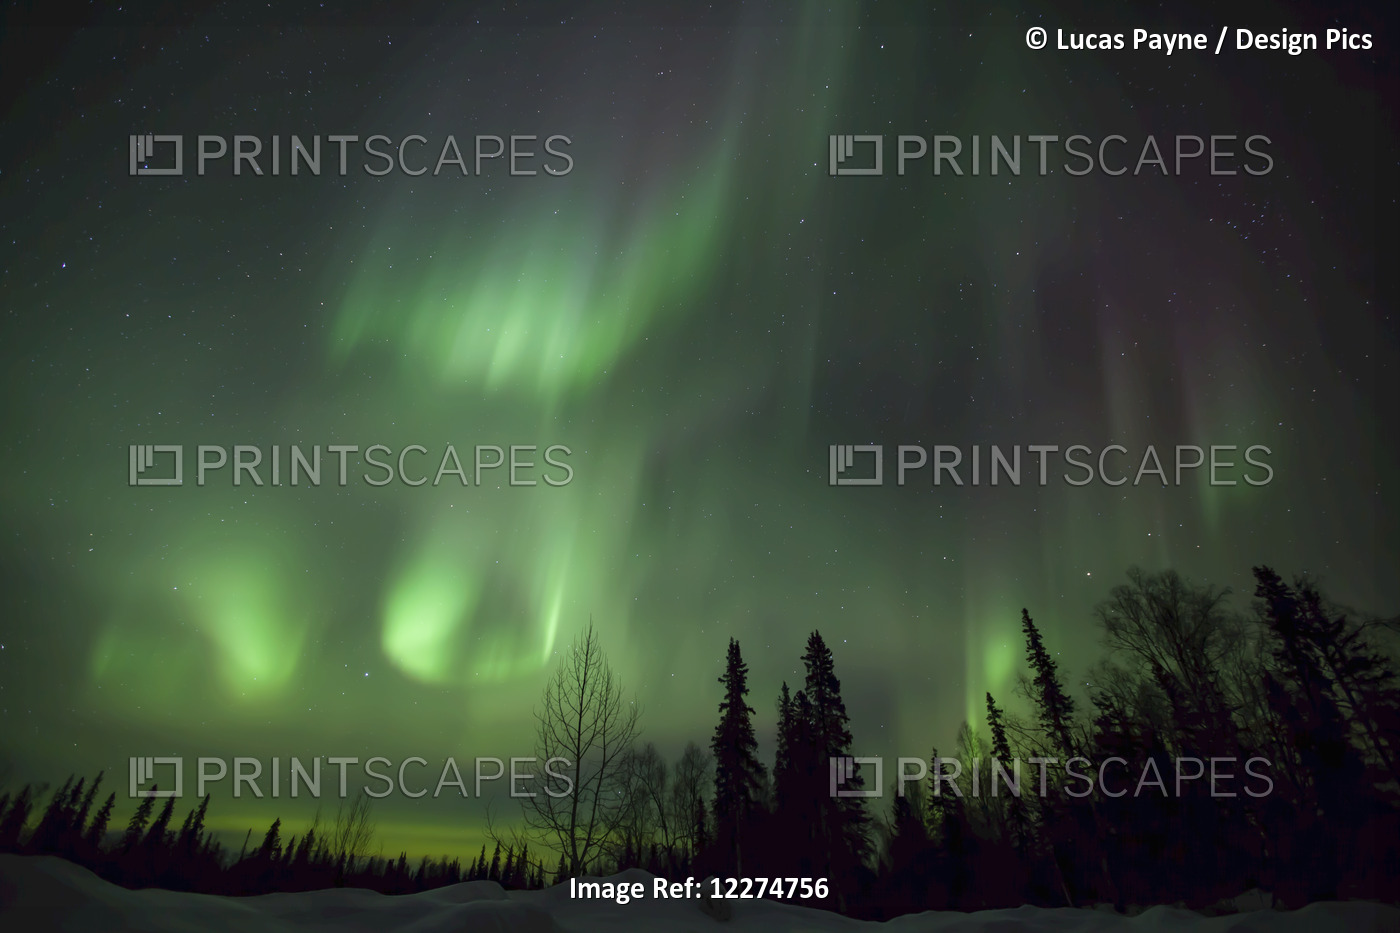 The Green Glow Of The Aurora Borealis (Northern Lights) From The Petersville ...